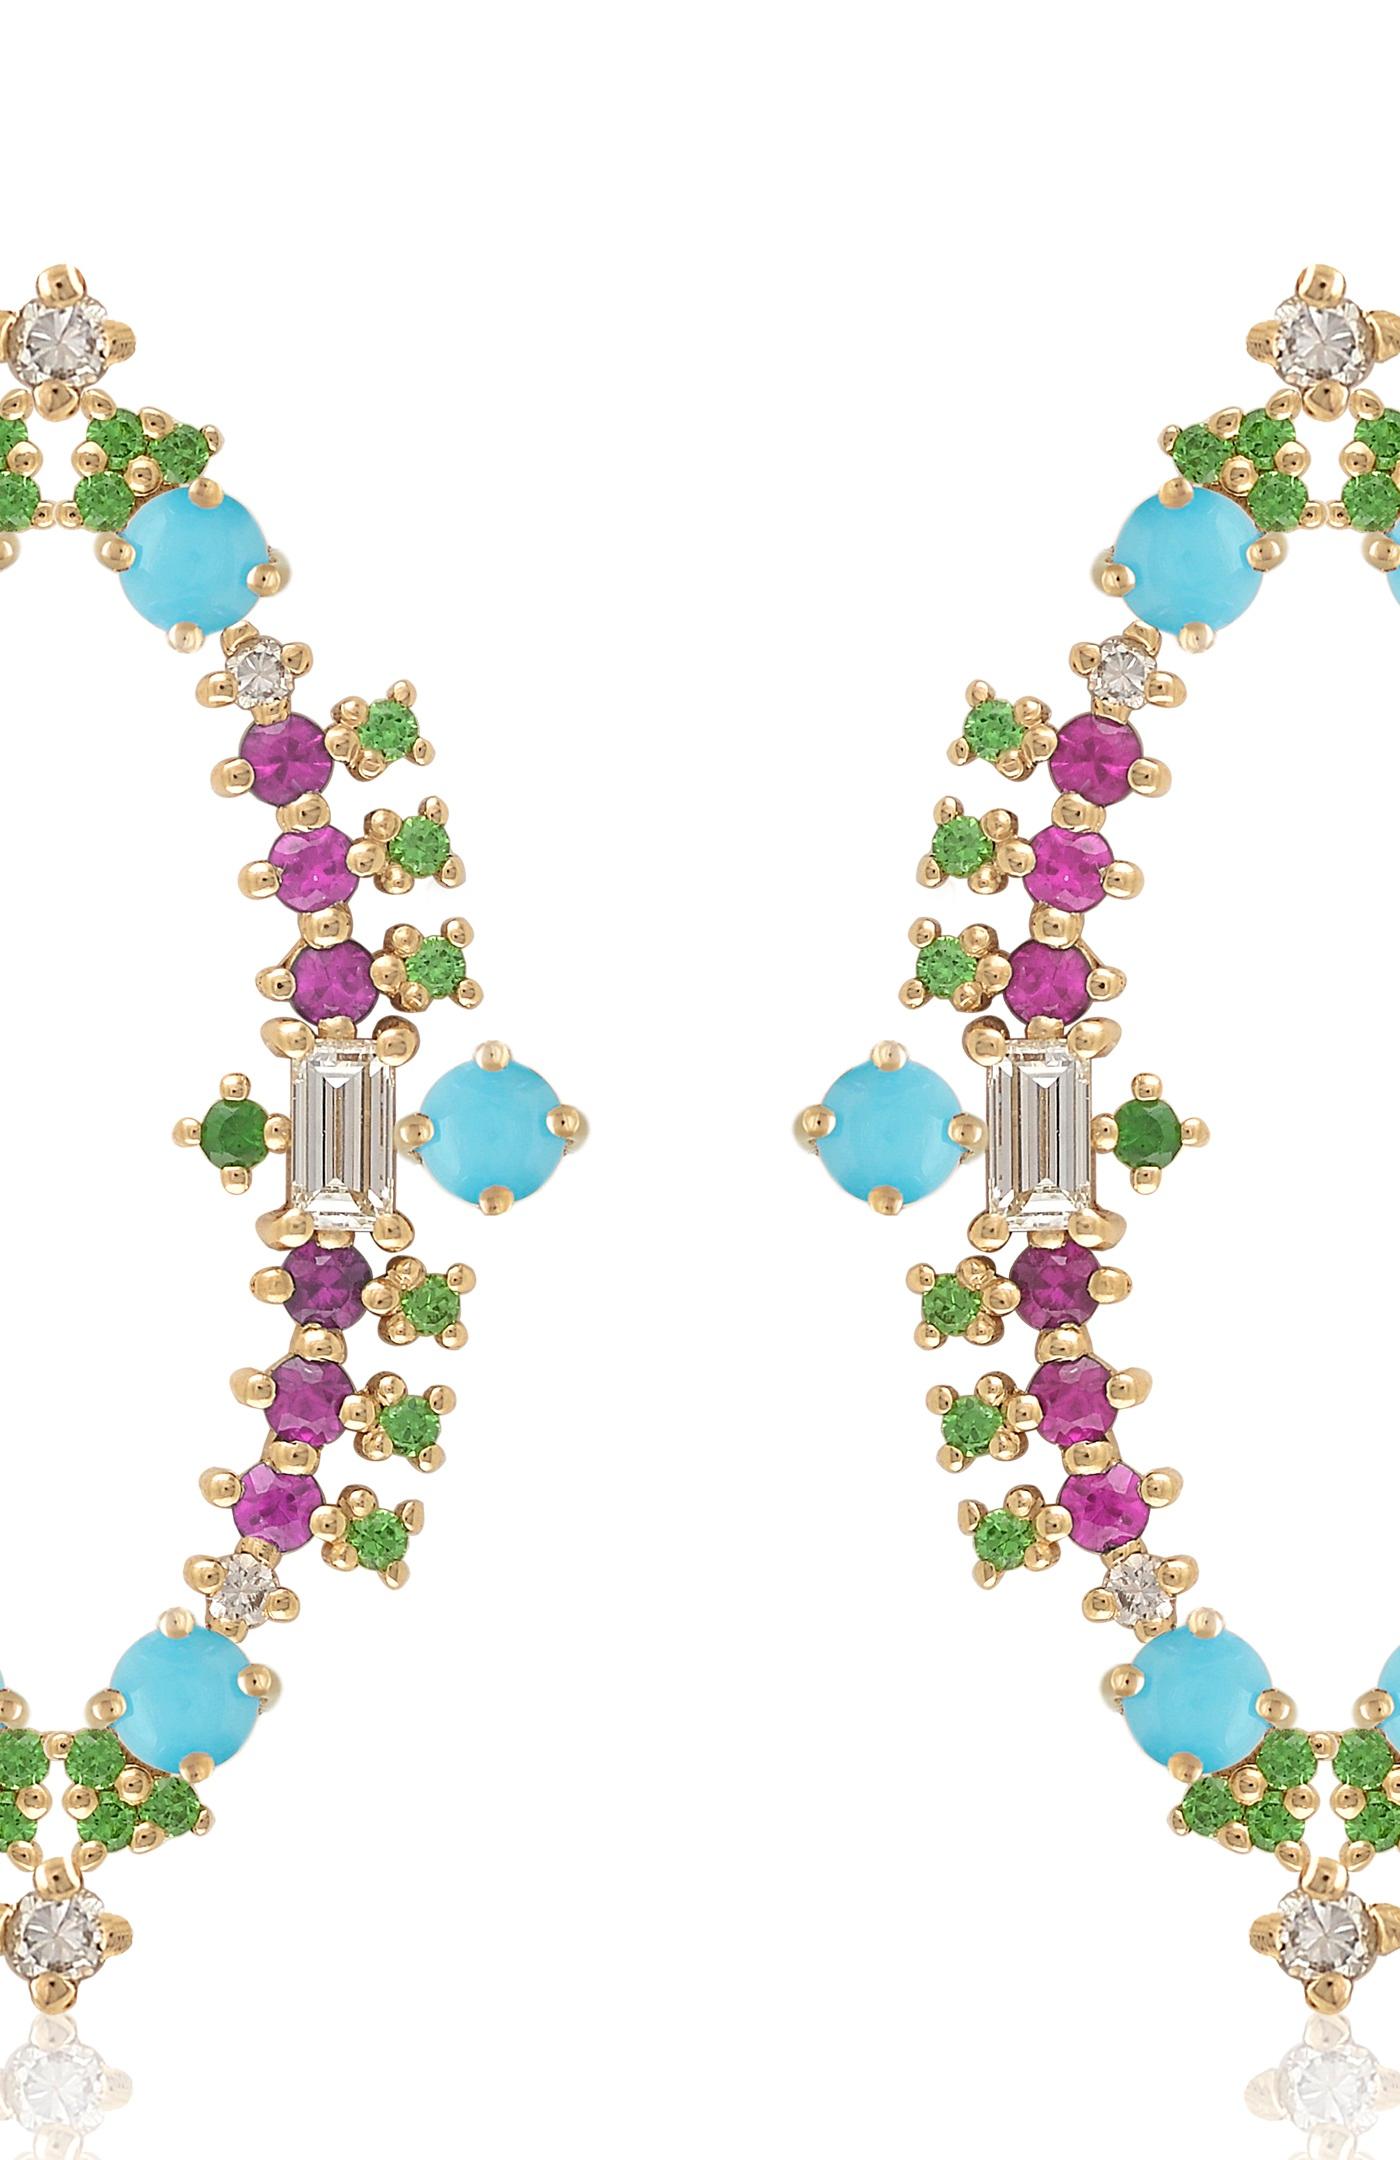 Designer: Alexia Gryllaki
Dimensions: L38x23mm
Weight: approximately 7.4g (pair)
Barcode: OFS049

Multi-stone earrings in 18 karat yellow gold with round faceted pink sapphires approx. 1.20cts, round faceted tsavorites approx. 0.52cts, round